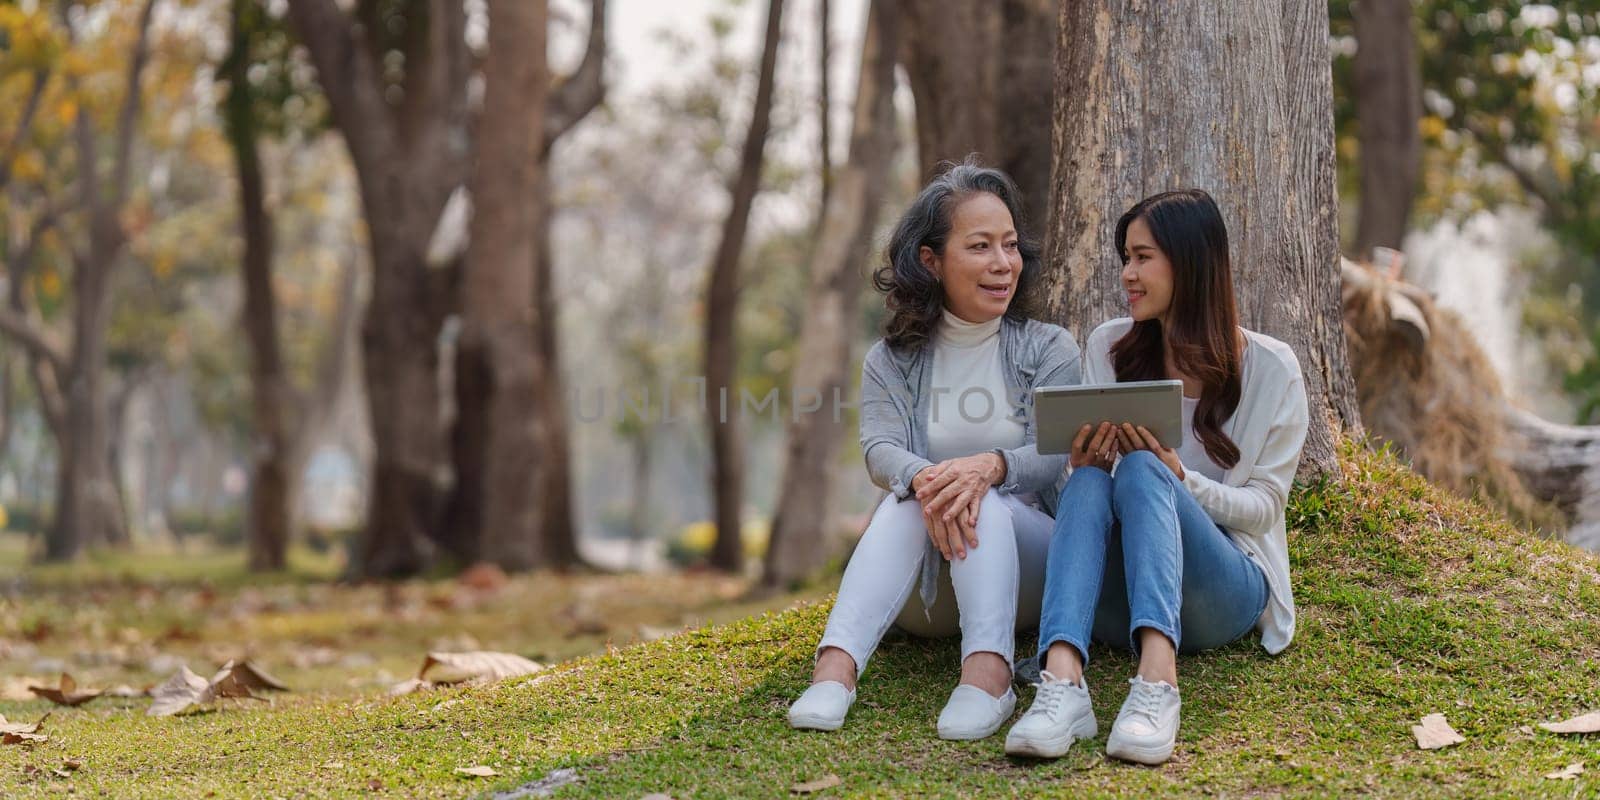 Adult daughter and her elderly mother have outdoor activity together.